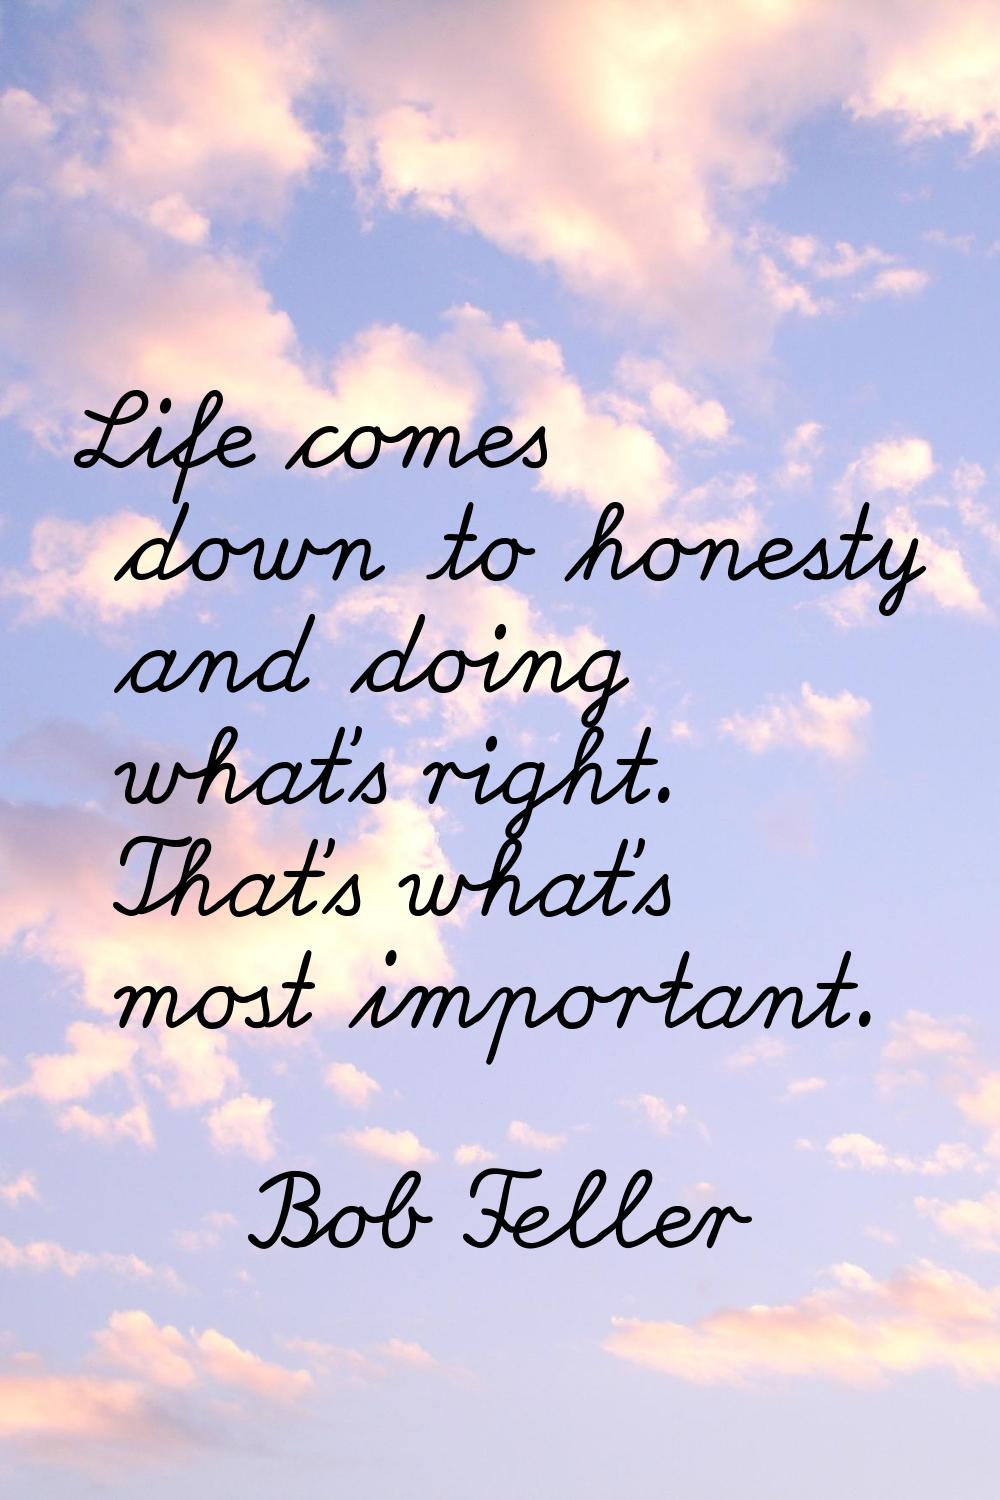 Life comes down to honesty and doing what's right. That's what's most important.